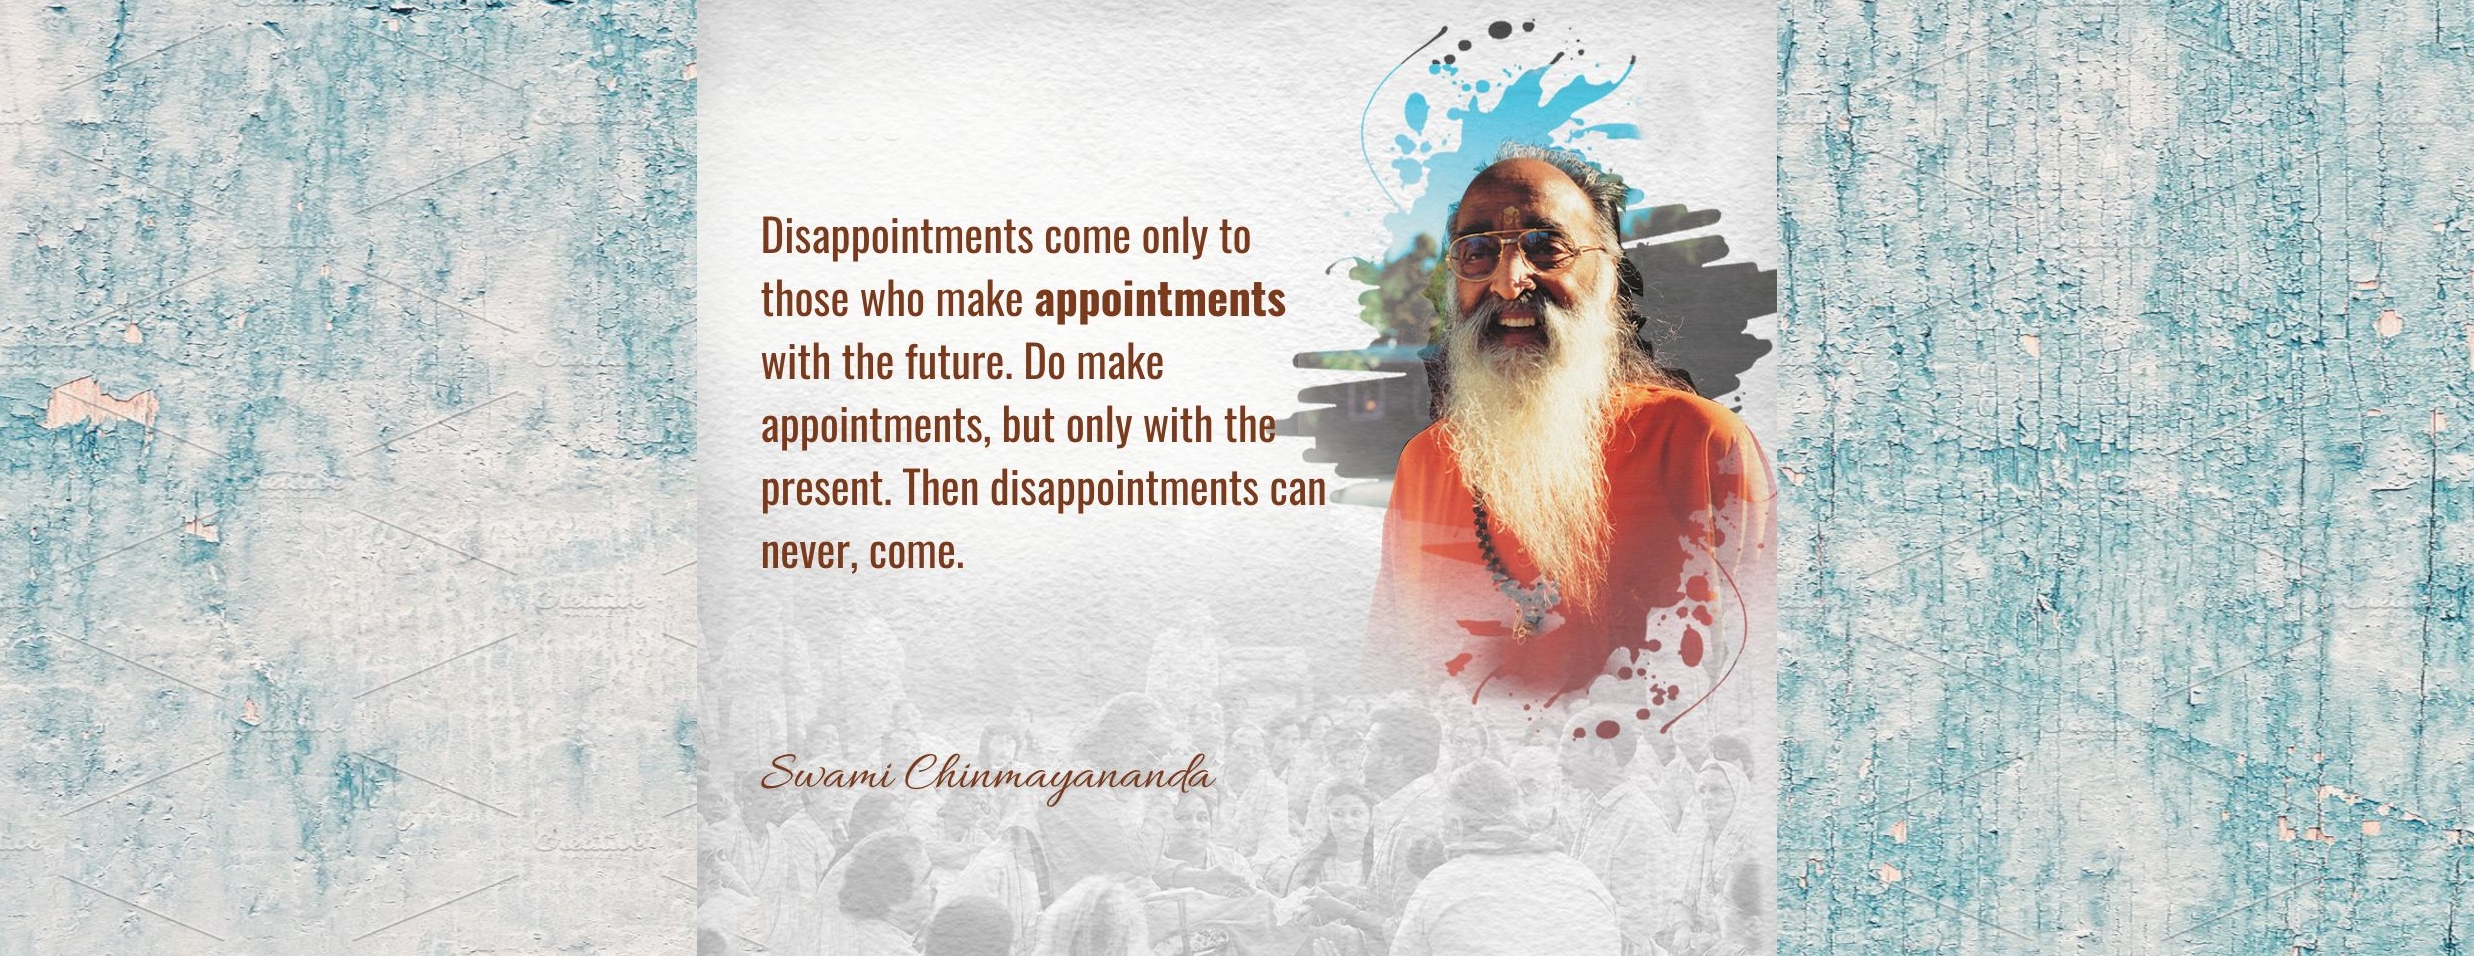 1 – Disappointments comes to those with Appointments